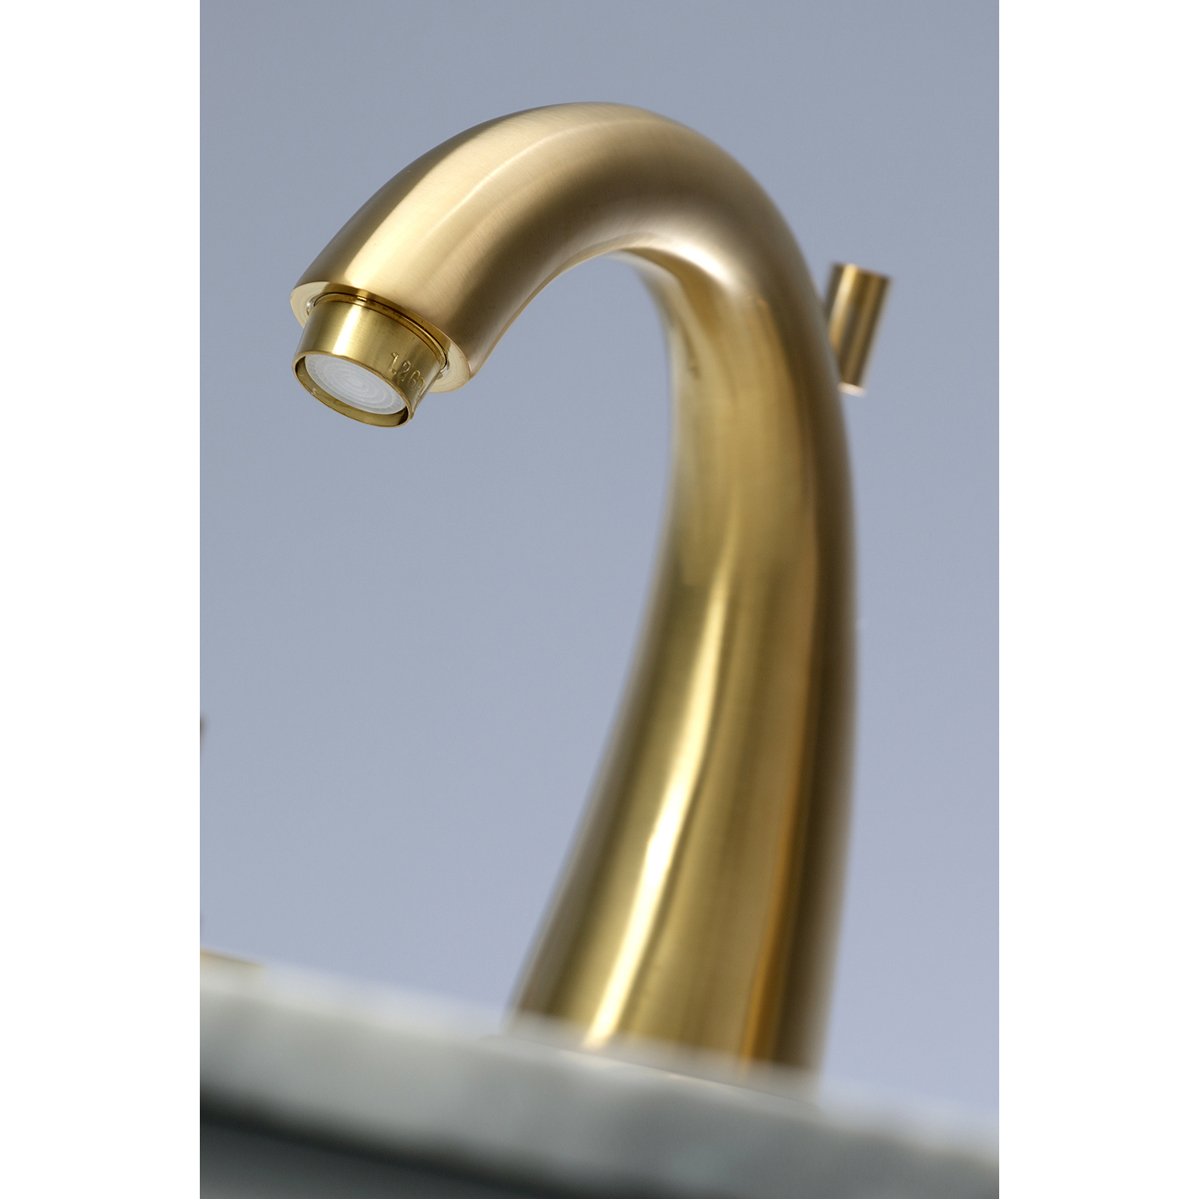 Kingston Brass Concord 3-Hole 8-Inch Widespread Bathroom Faucet